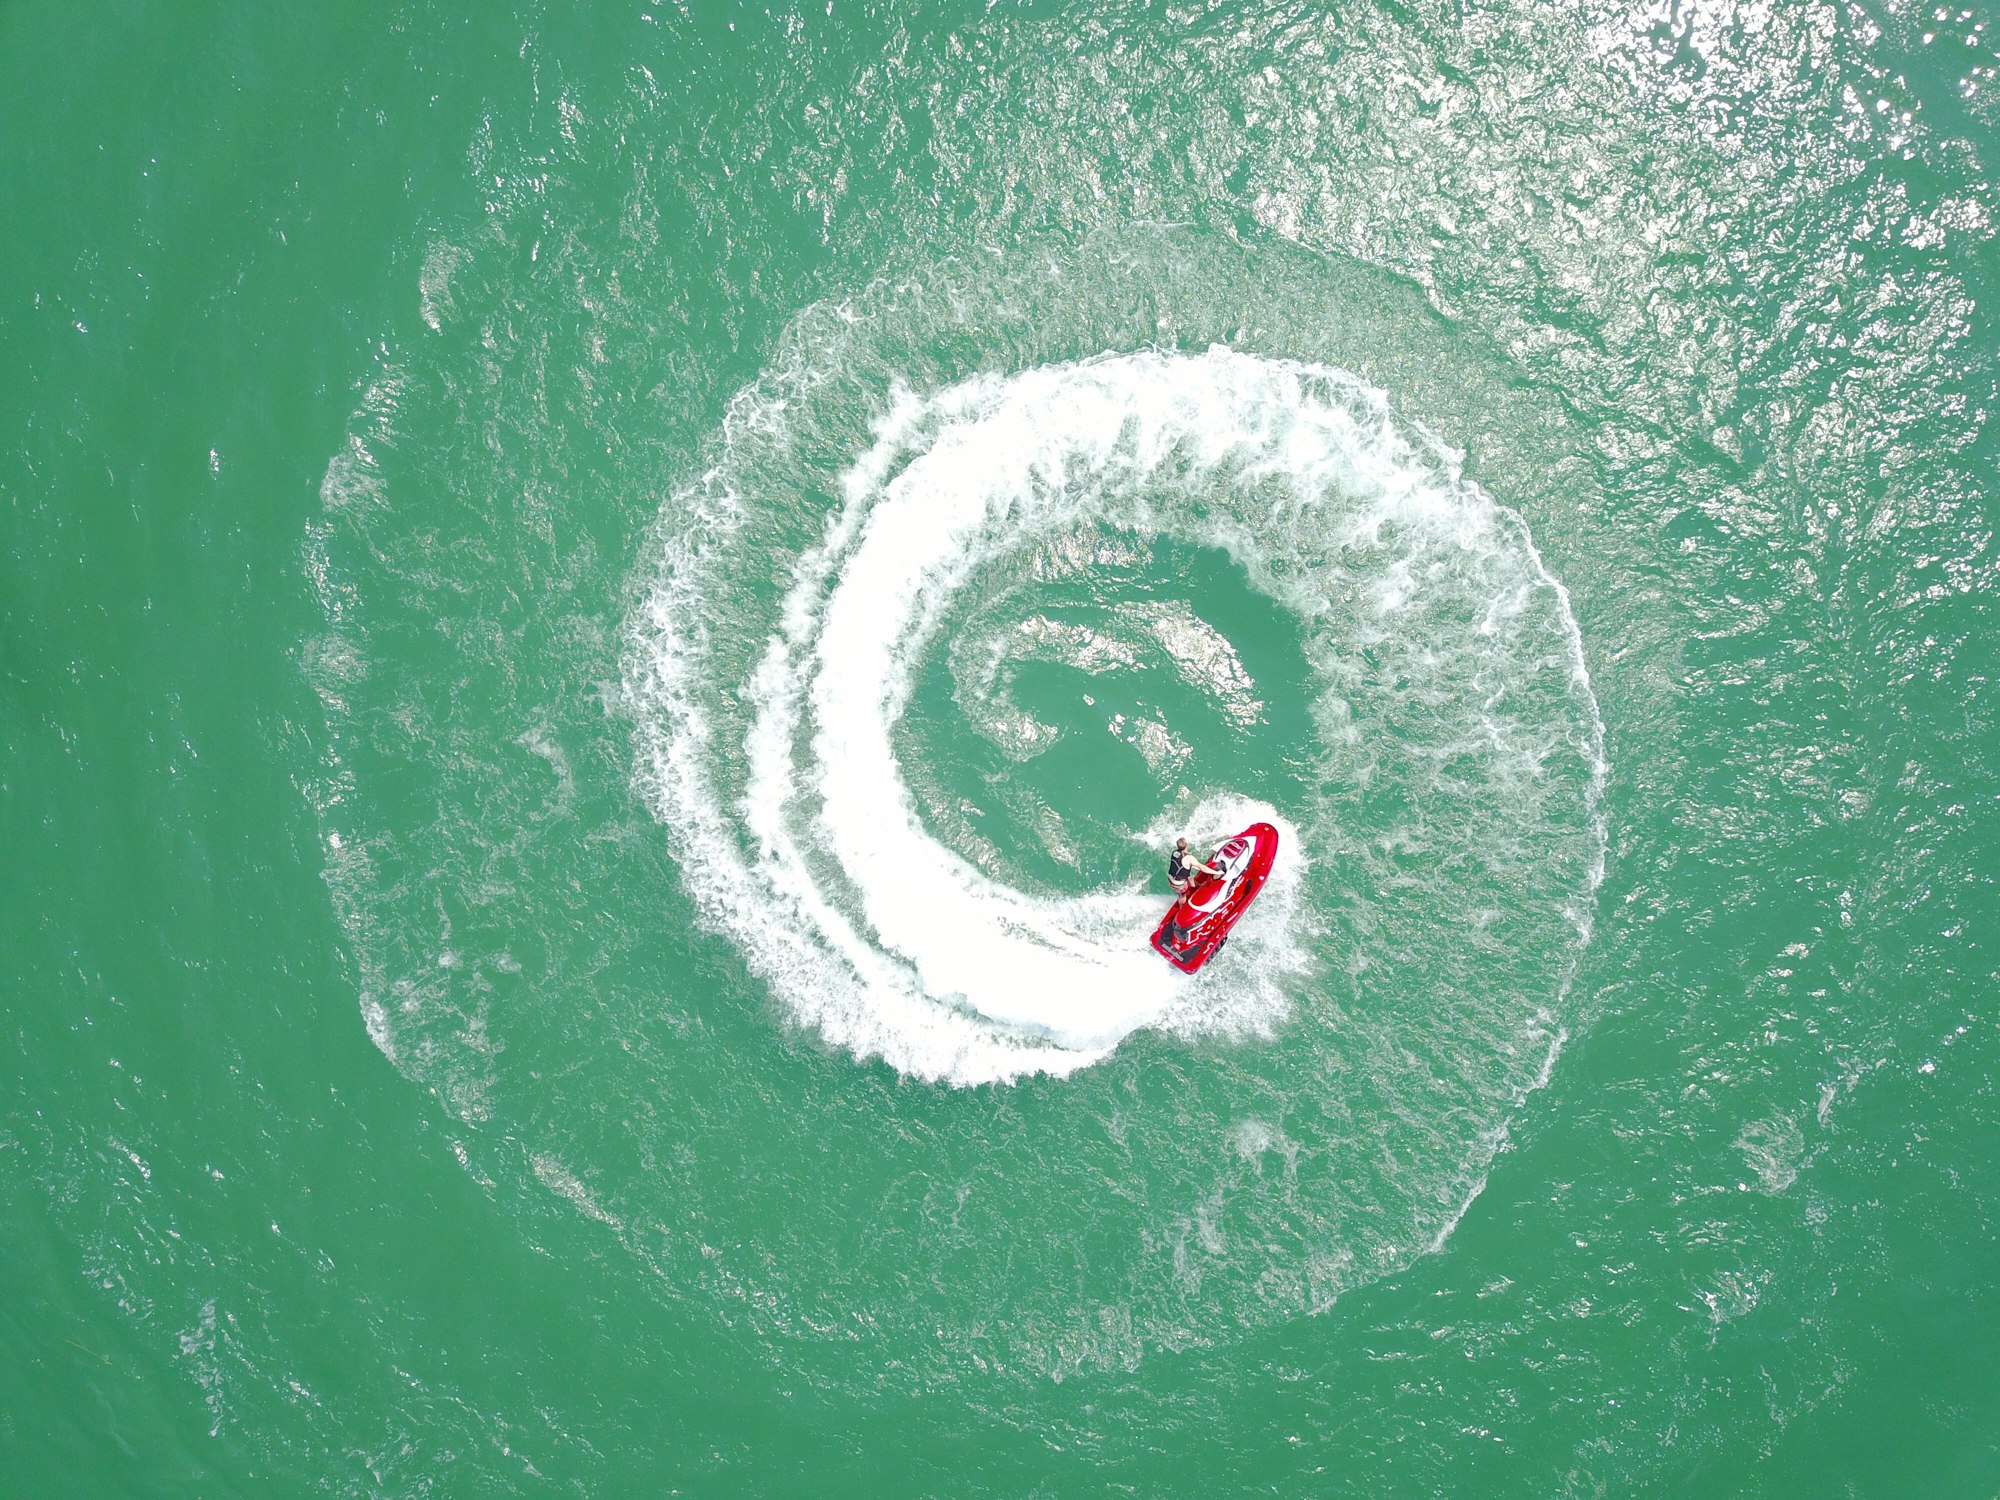 Wanted to see what a spinning jet ski looks like from above! Bear lake has some crazy looking blue water so we thought we would add some action to it.